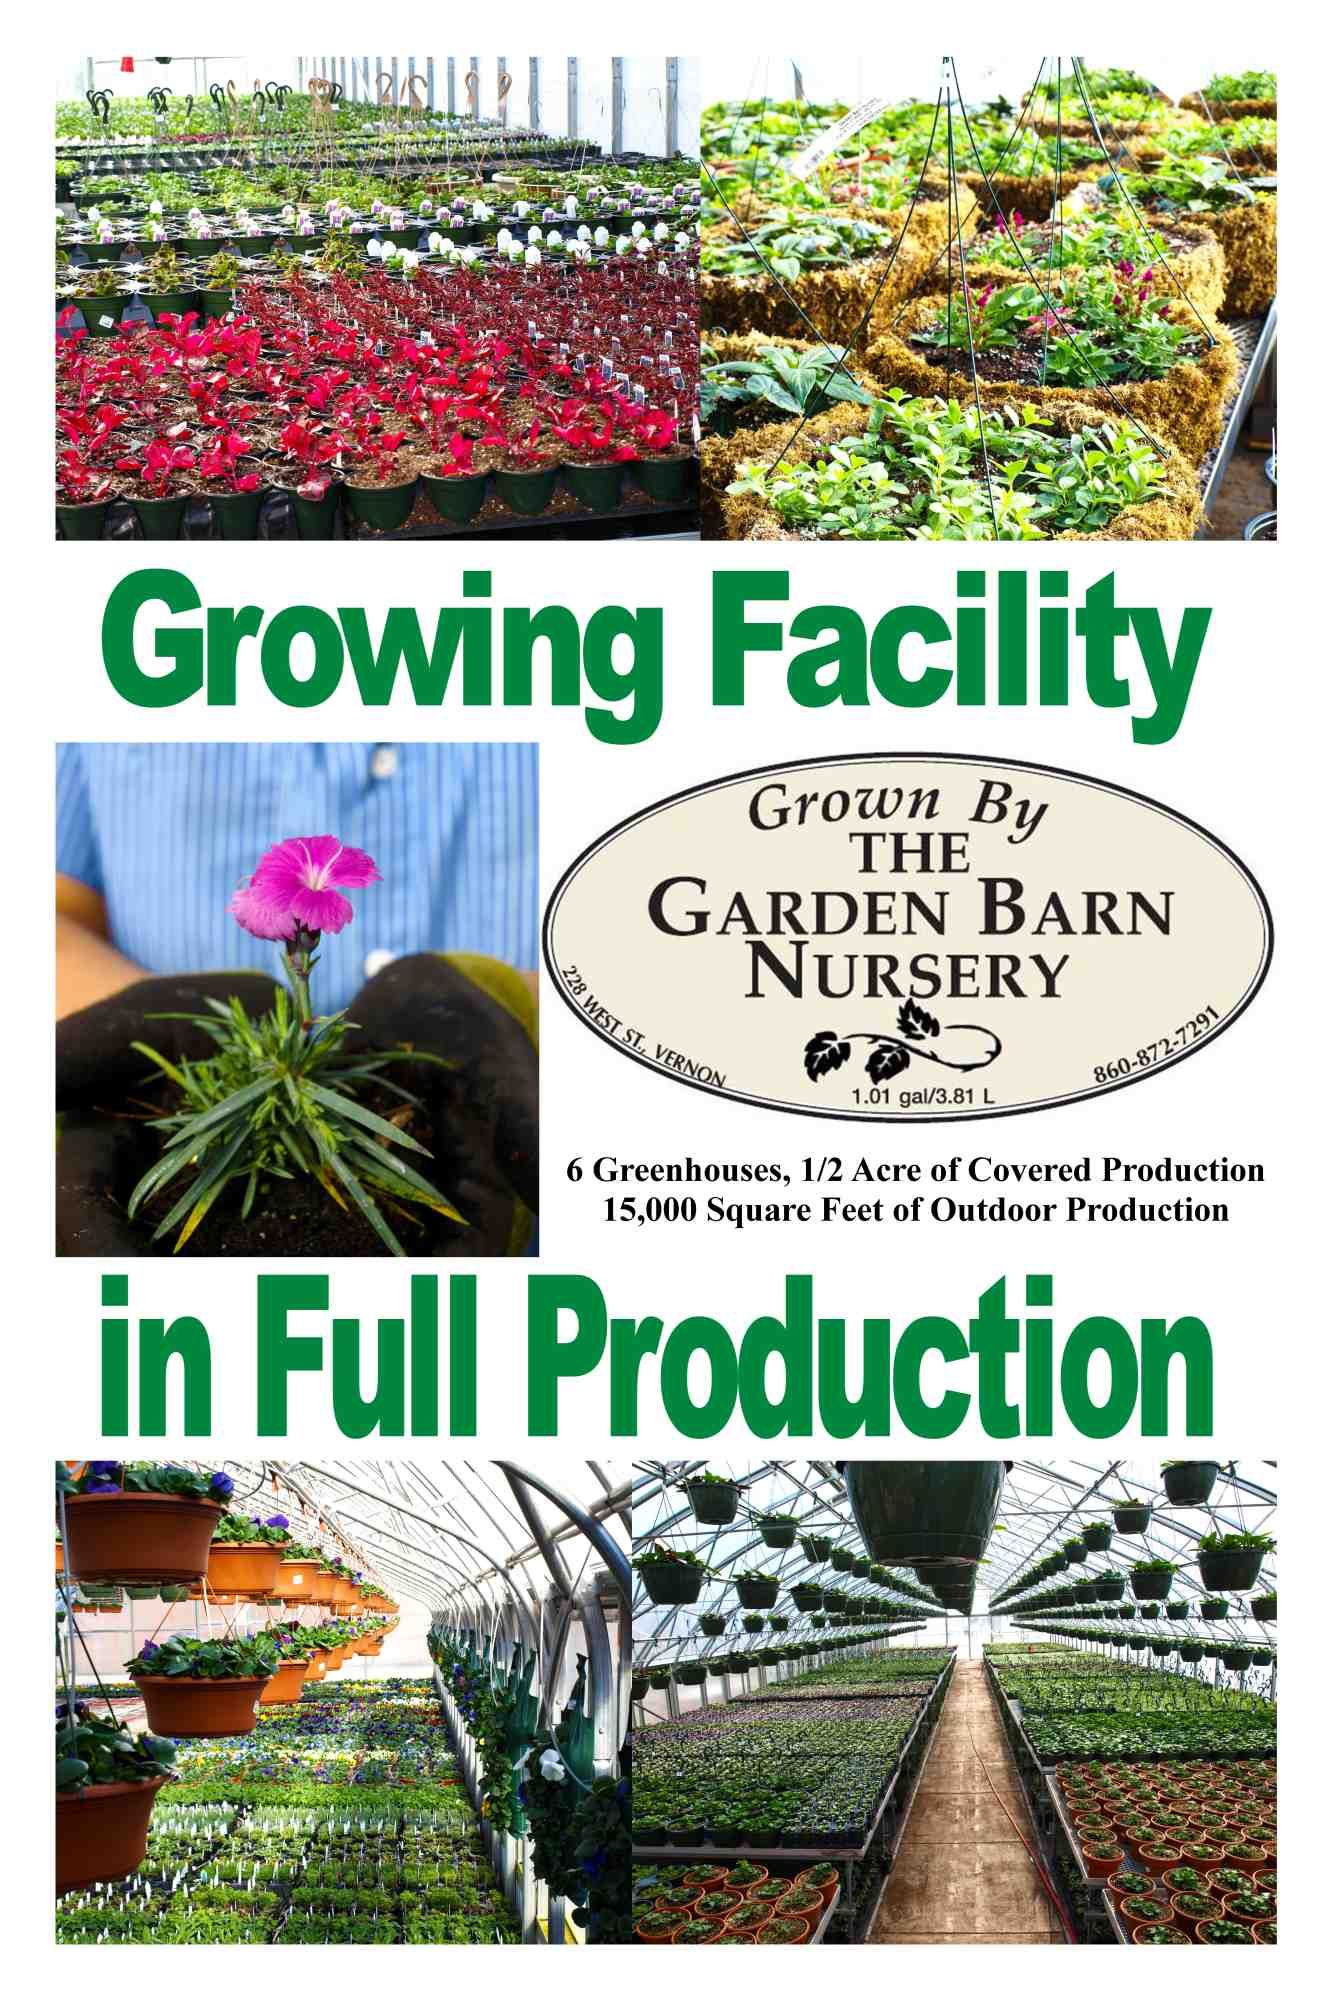 How The Garden Barn Nursery Uses Signage To Capture Their